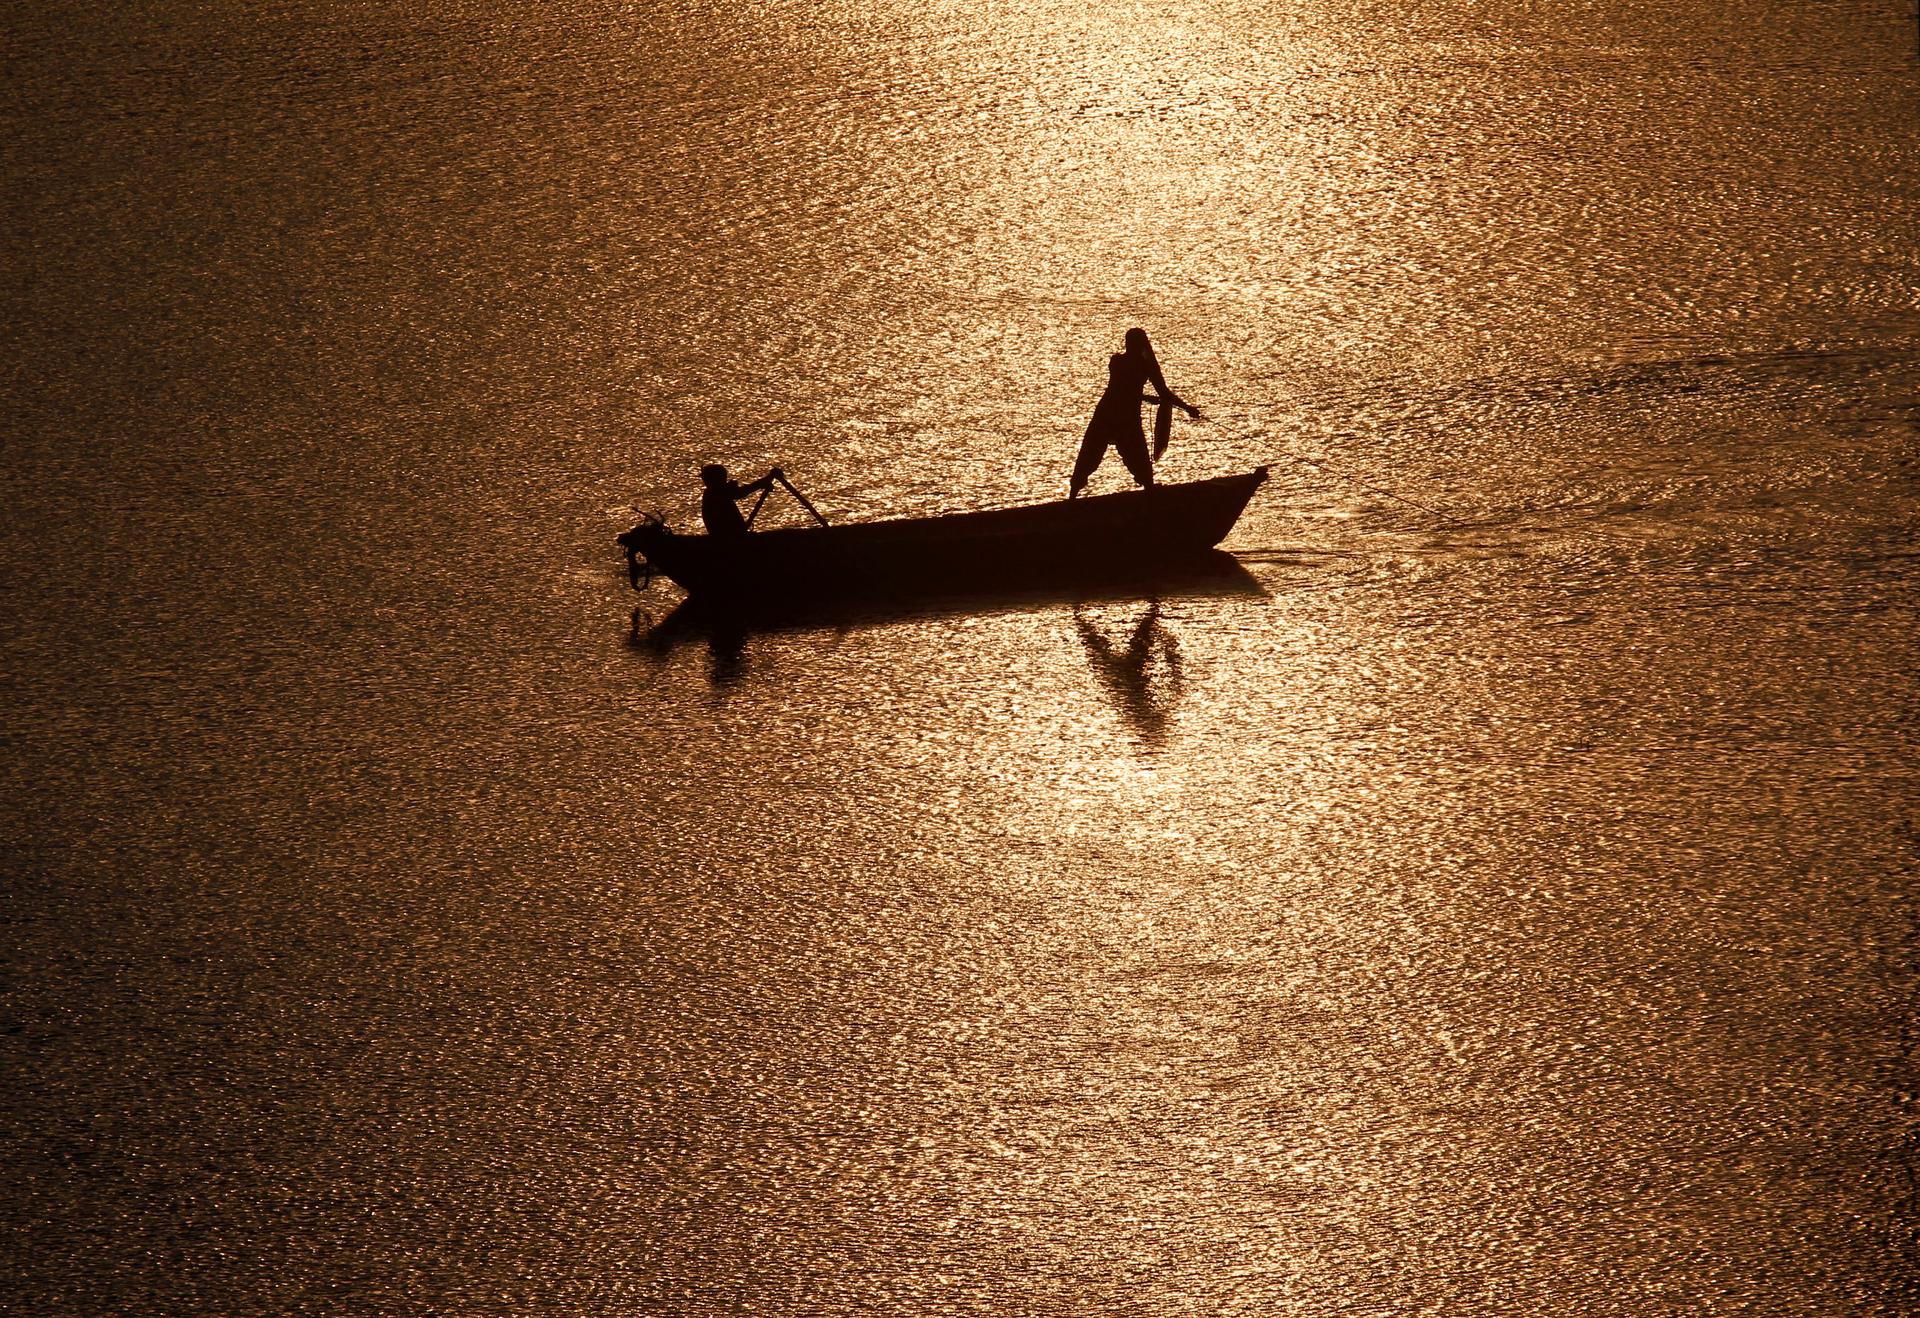 Fisherman are silhouetted against the rising sun in the waters of the Ganges river.